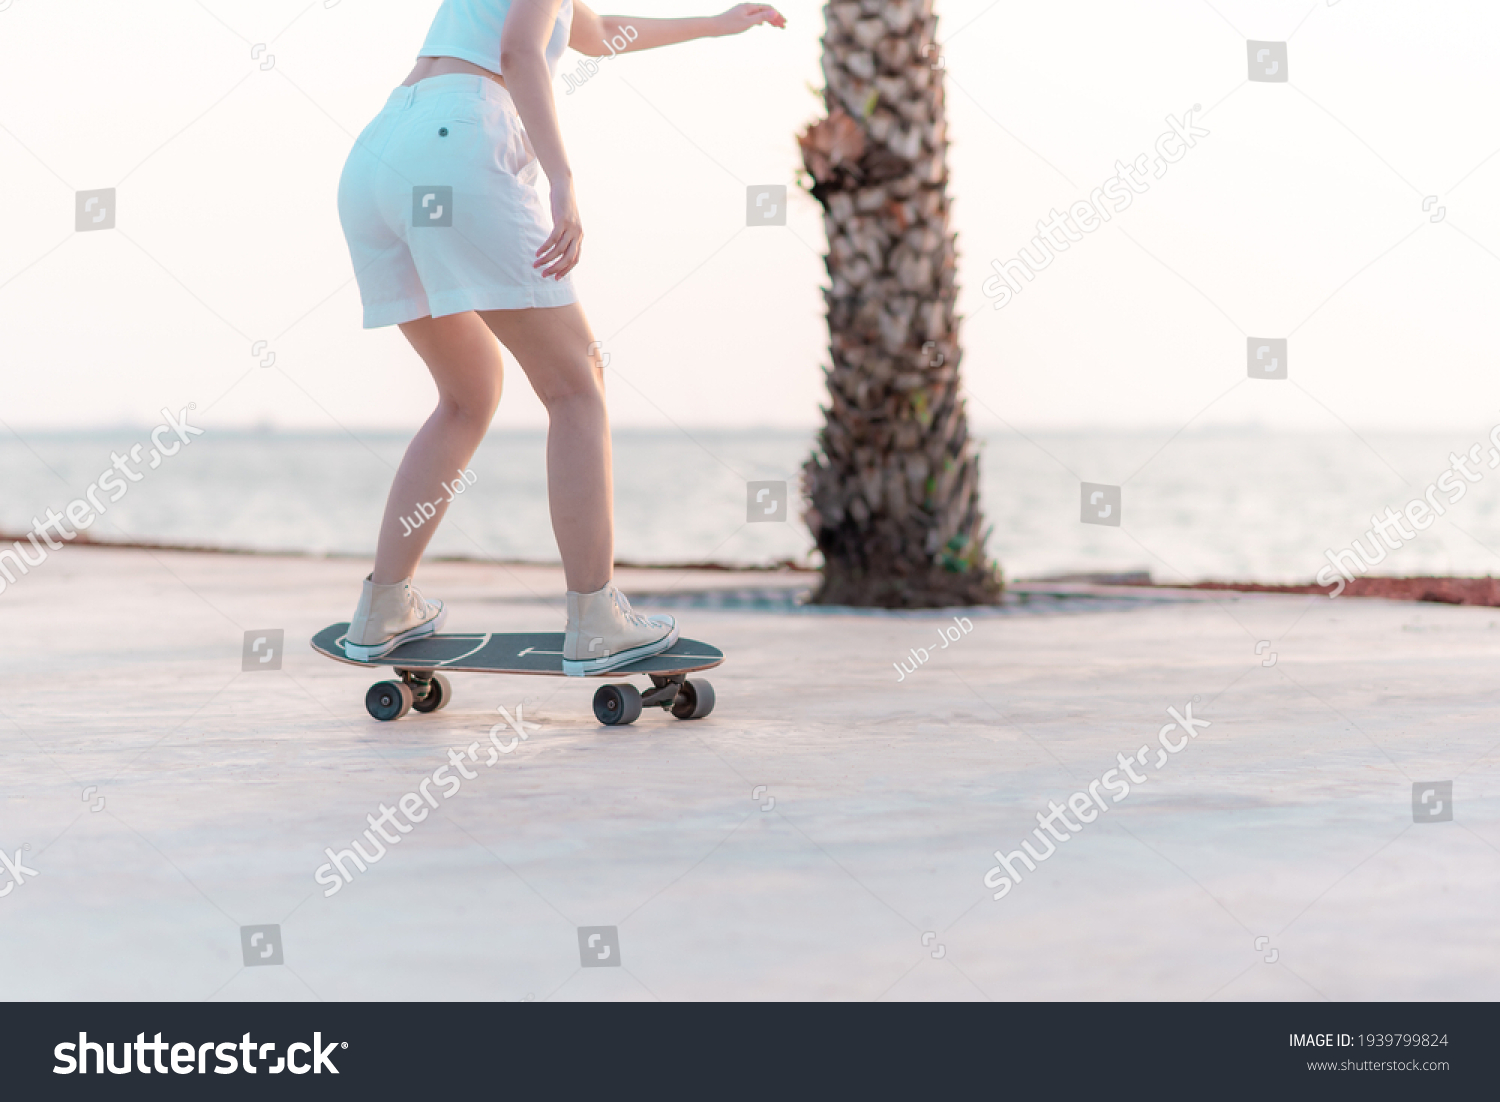 Close up rear view Asian women leg on surf skate or skate board in breach background #1939799824